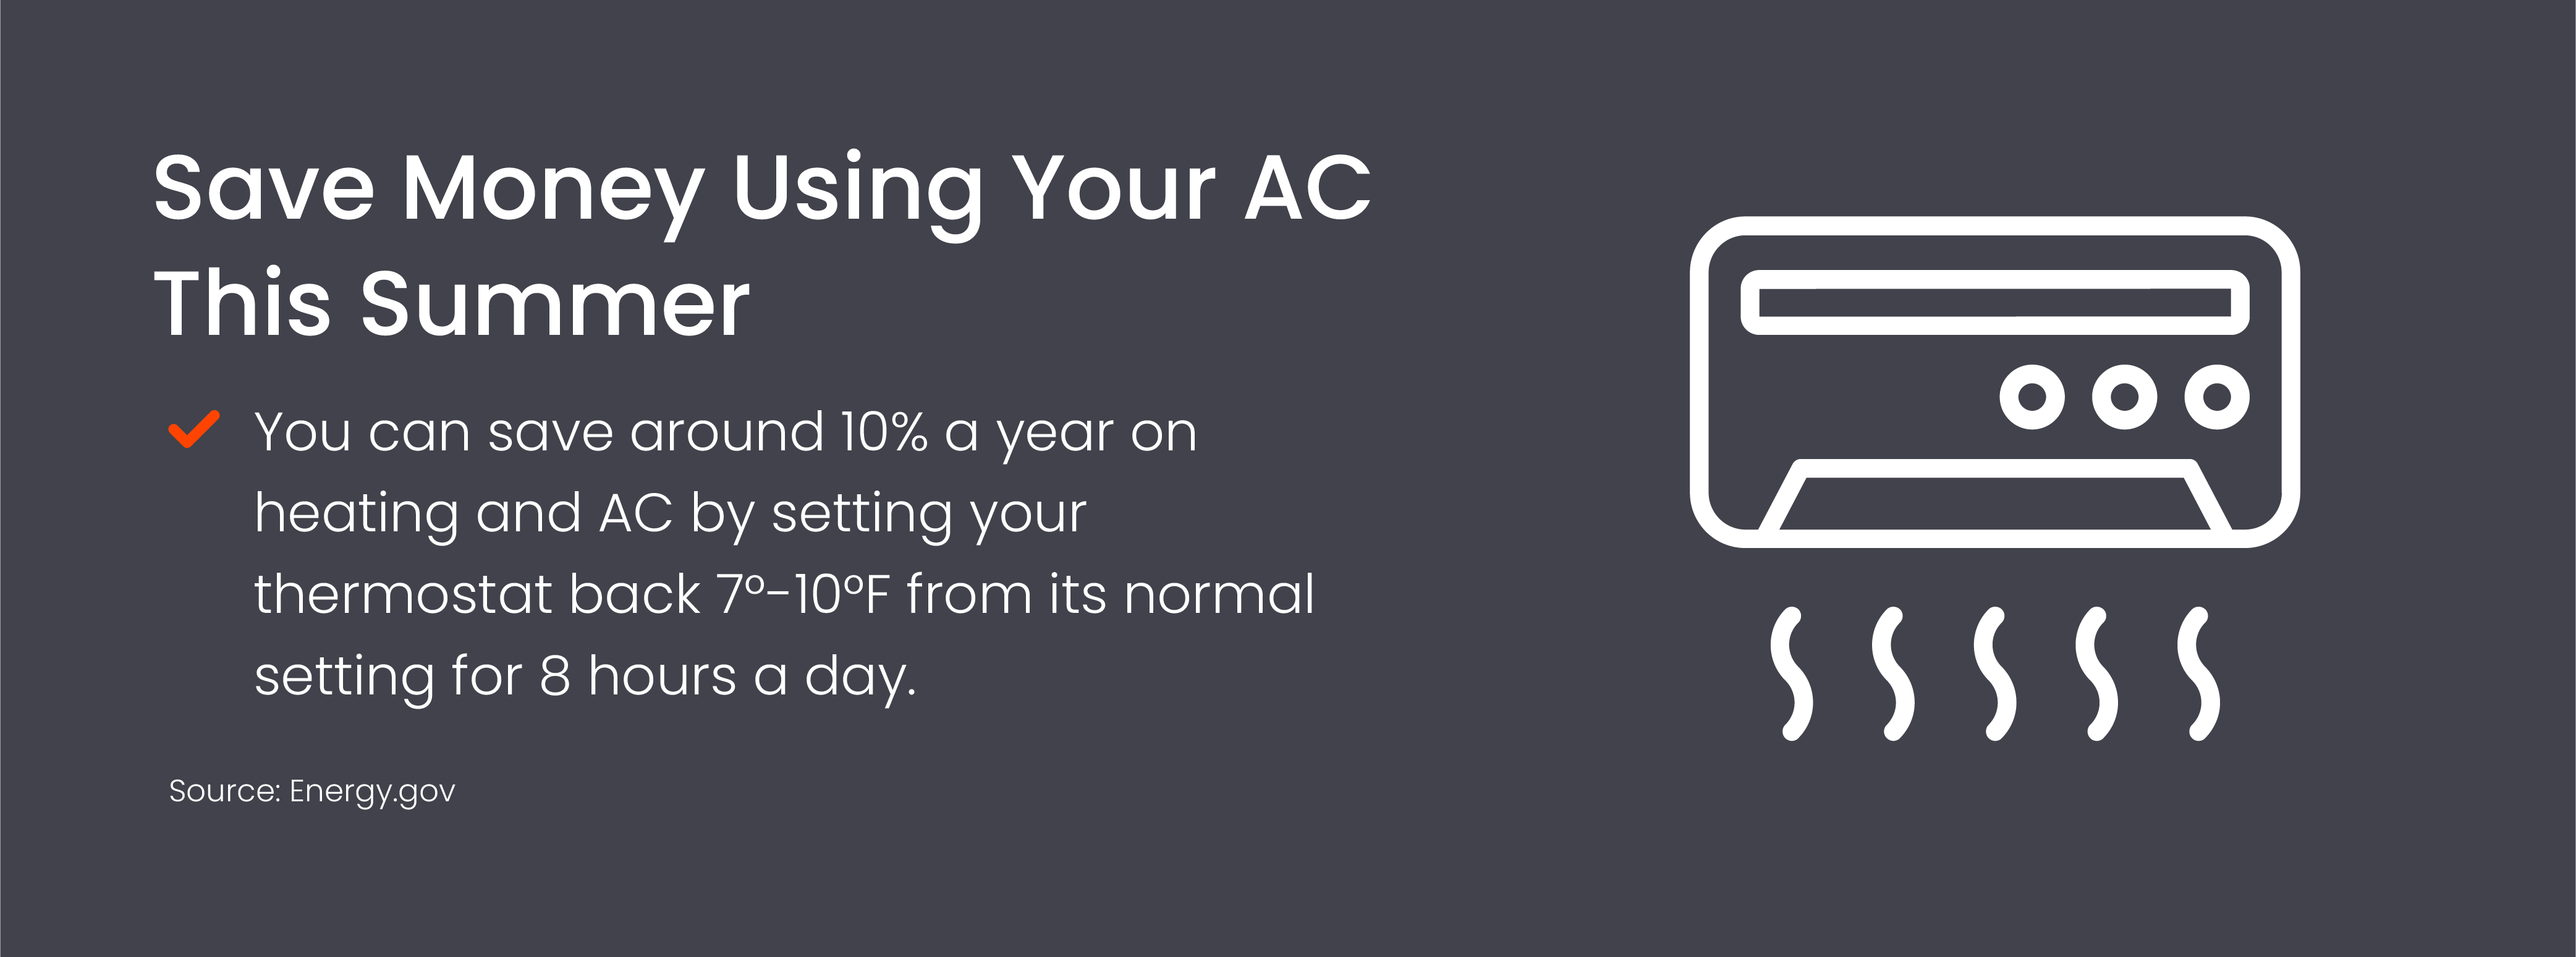 Save Money Using Your AC This Summer